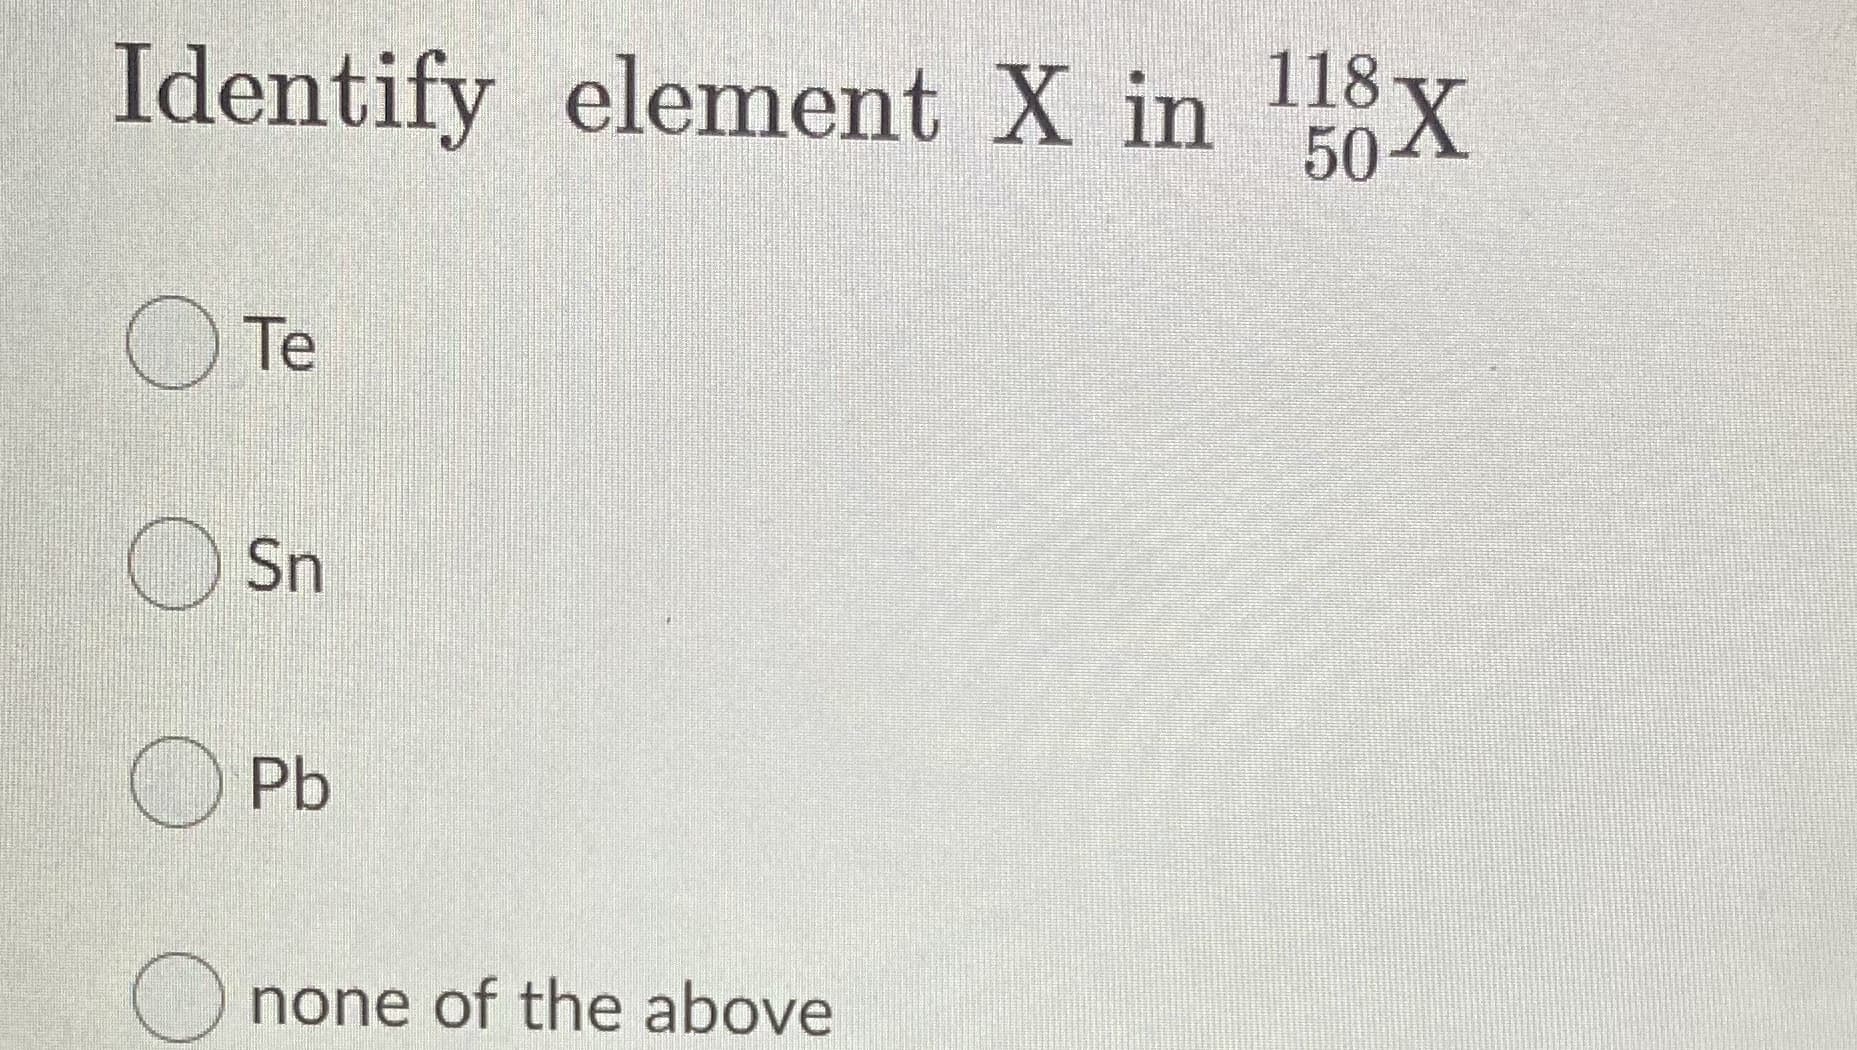 Identify element X in 118 x
50-
O Te
O Sn
Pb
none of the above
